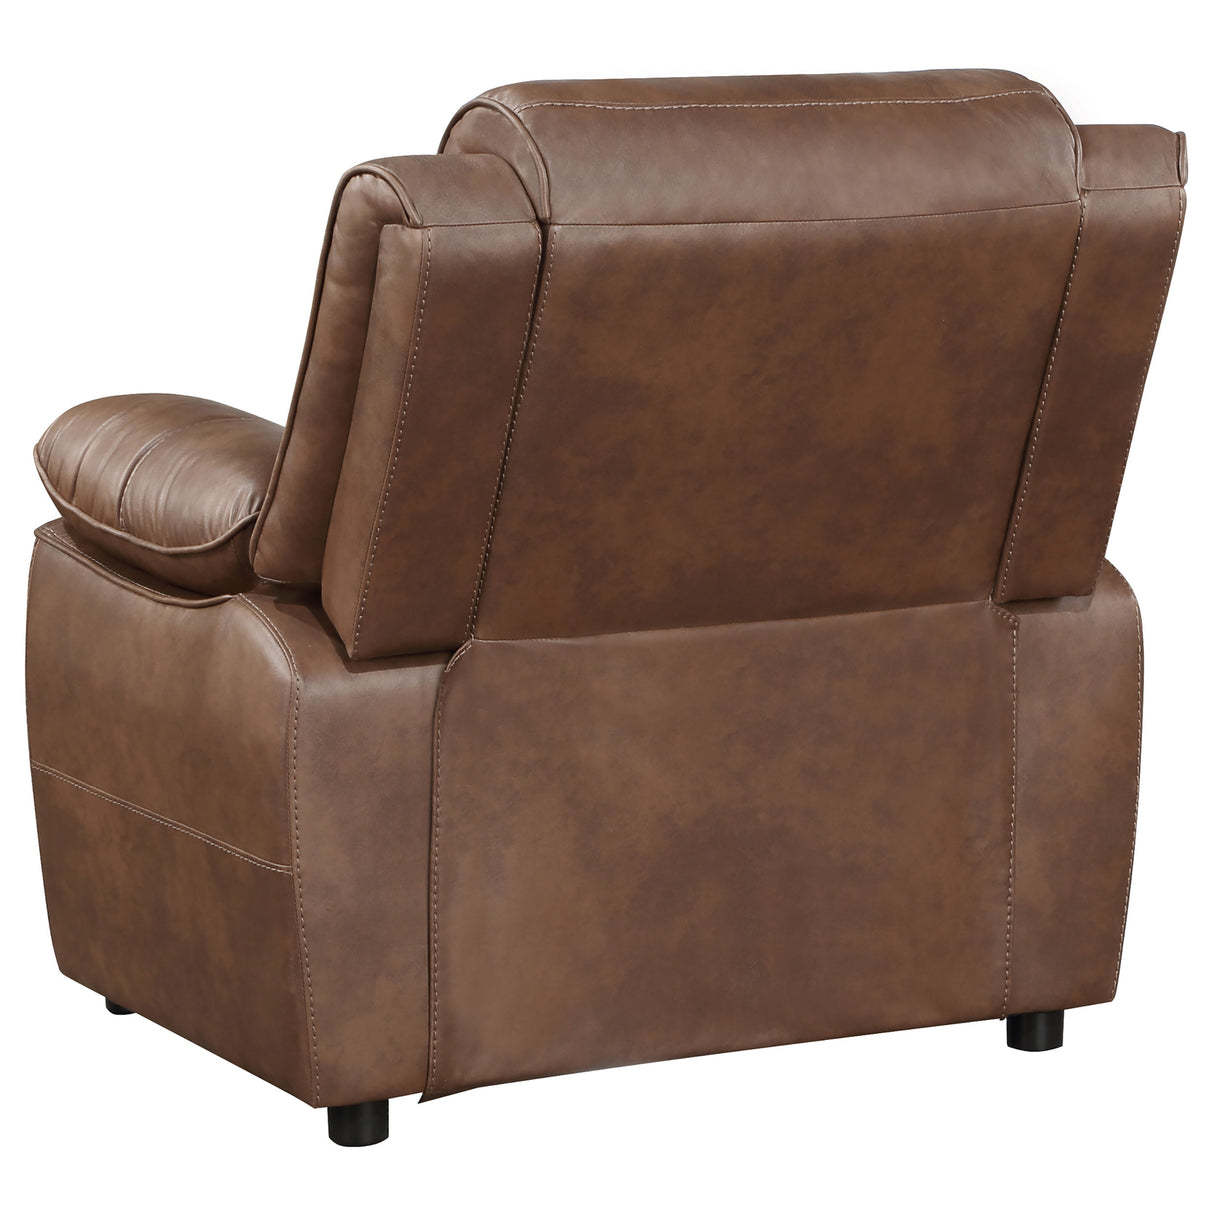 Chair - Ellington Upholstered Padded Arm Accent Chair Dark Brown